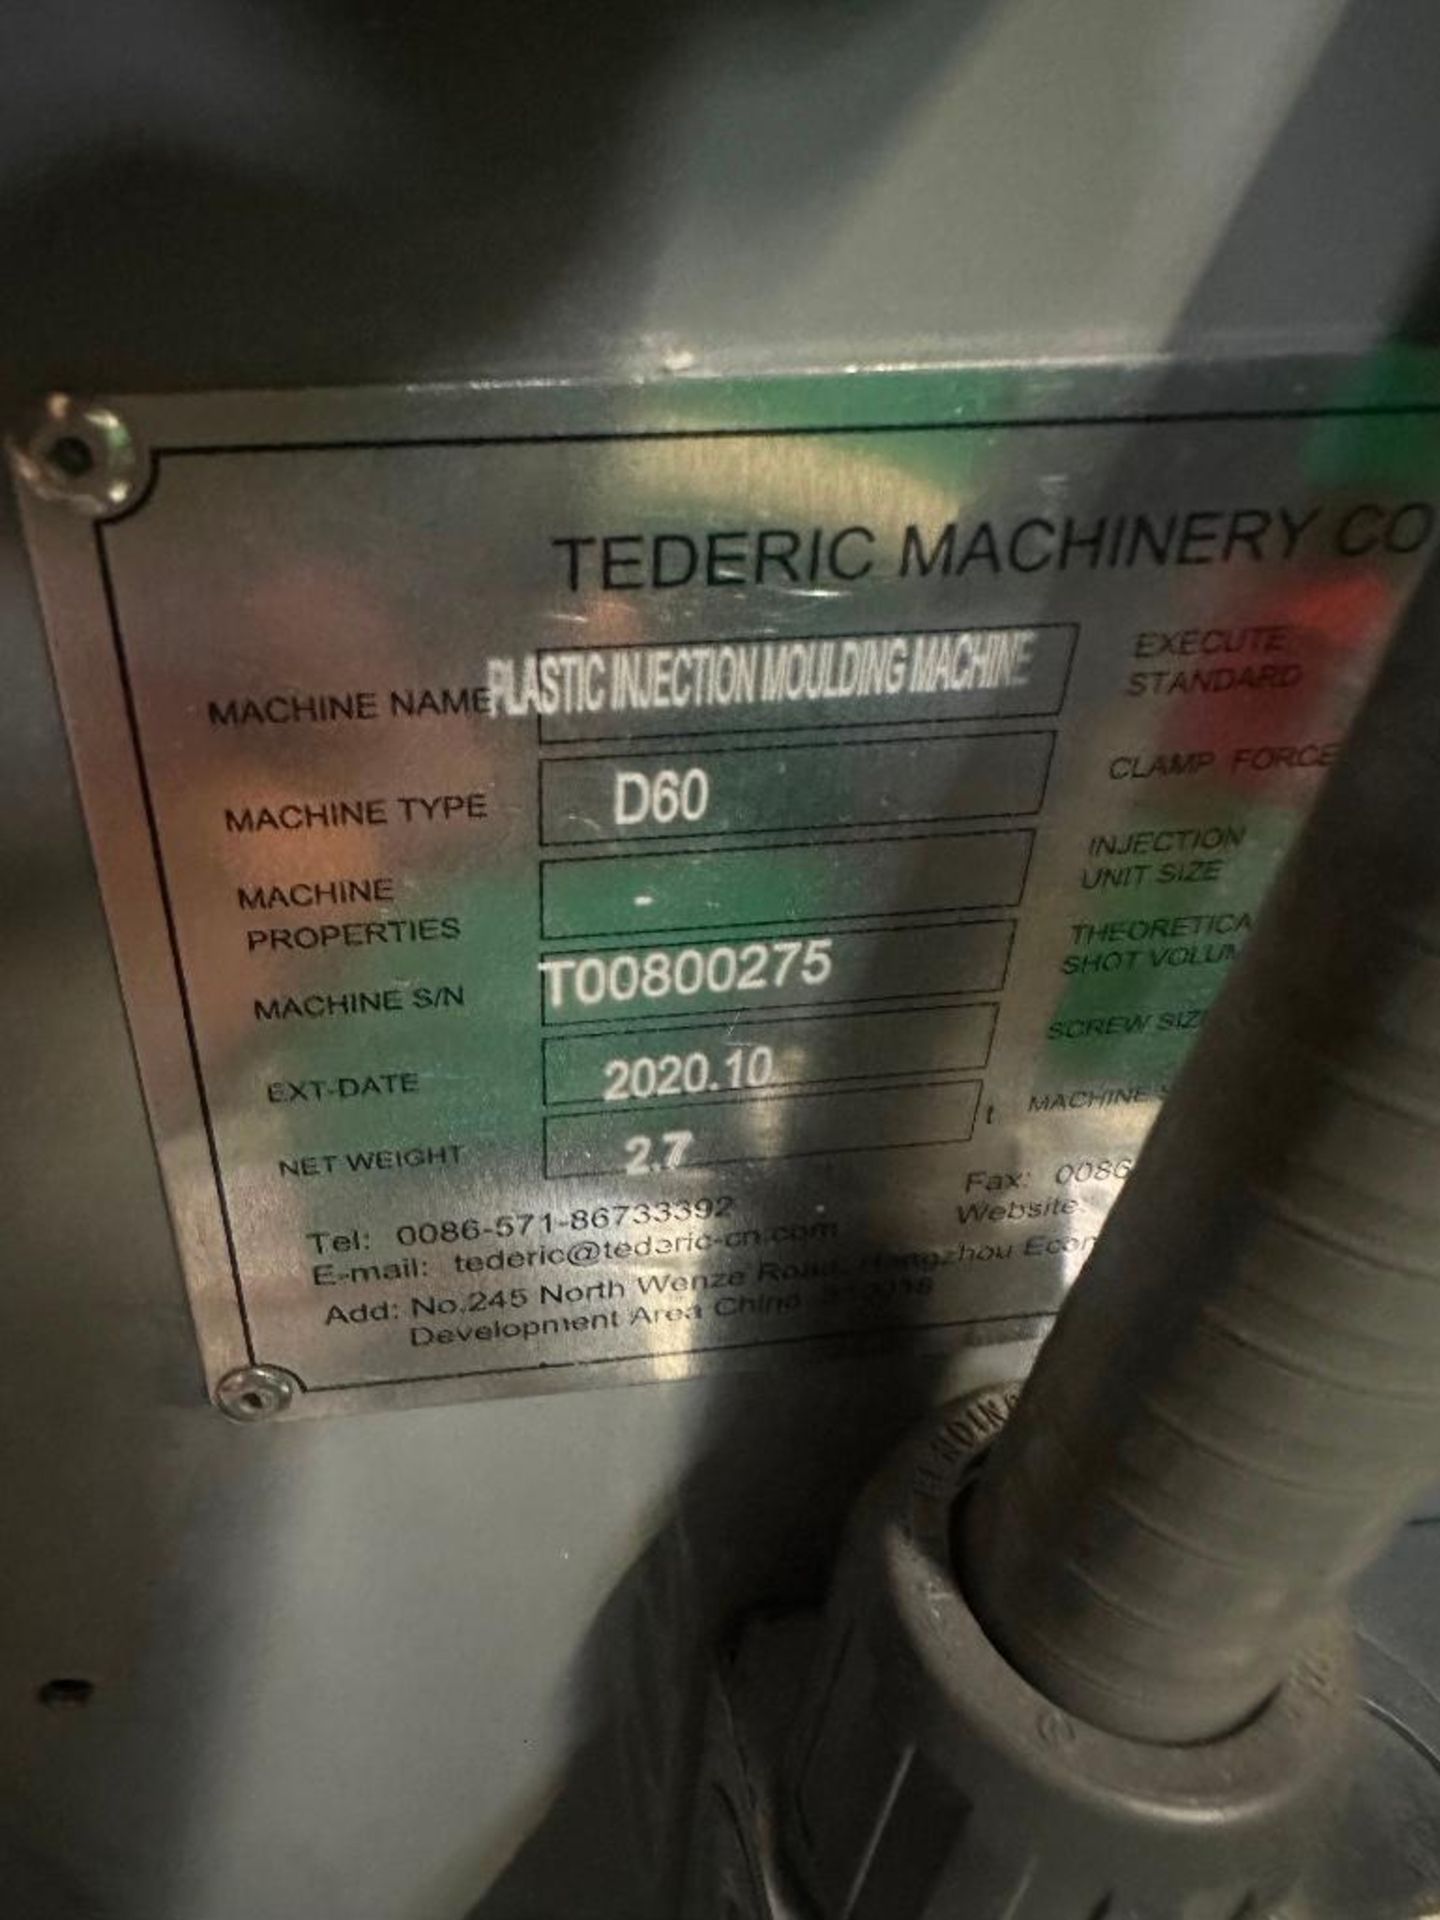 66 Ton Tederic D60 Plastic Injection Molder, Keba 12000 Control, s/n T00800275, New 2020 - Image 14 of 15